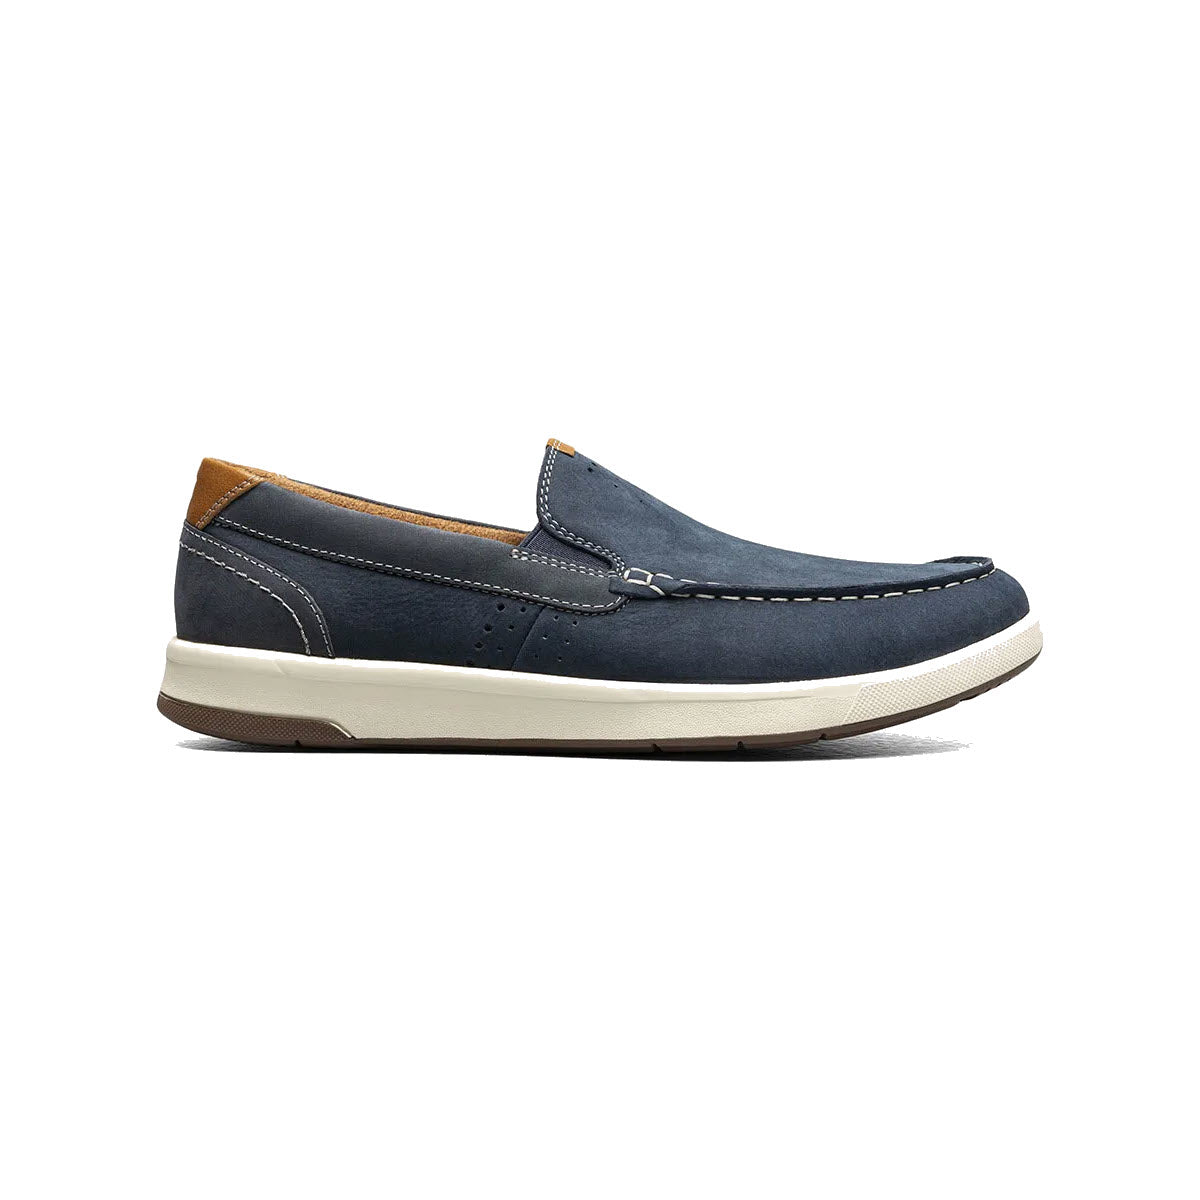 A Florsheim navy nubuck leather slip-on loafer with white soles and a brown leather accent on the heel, displayed against a white background.